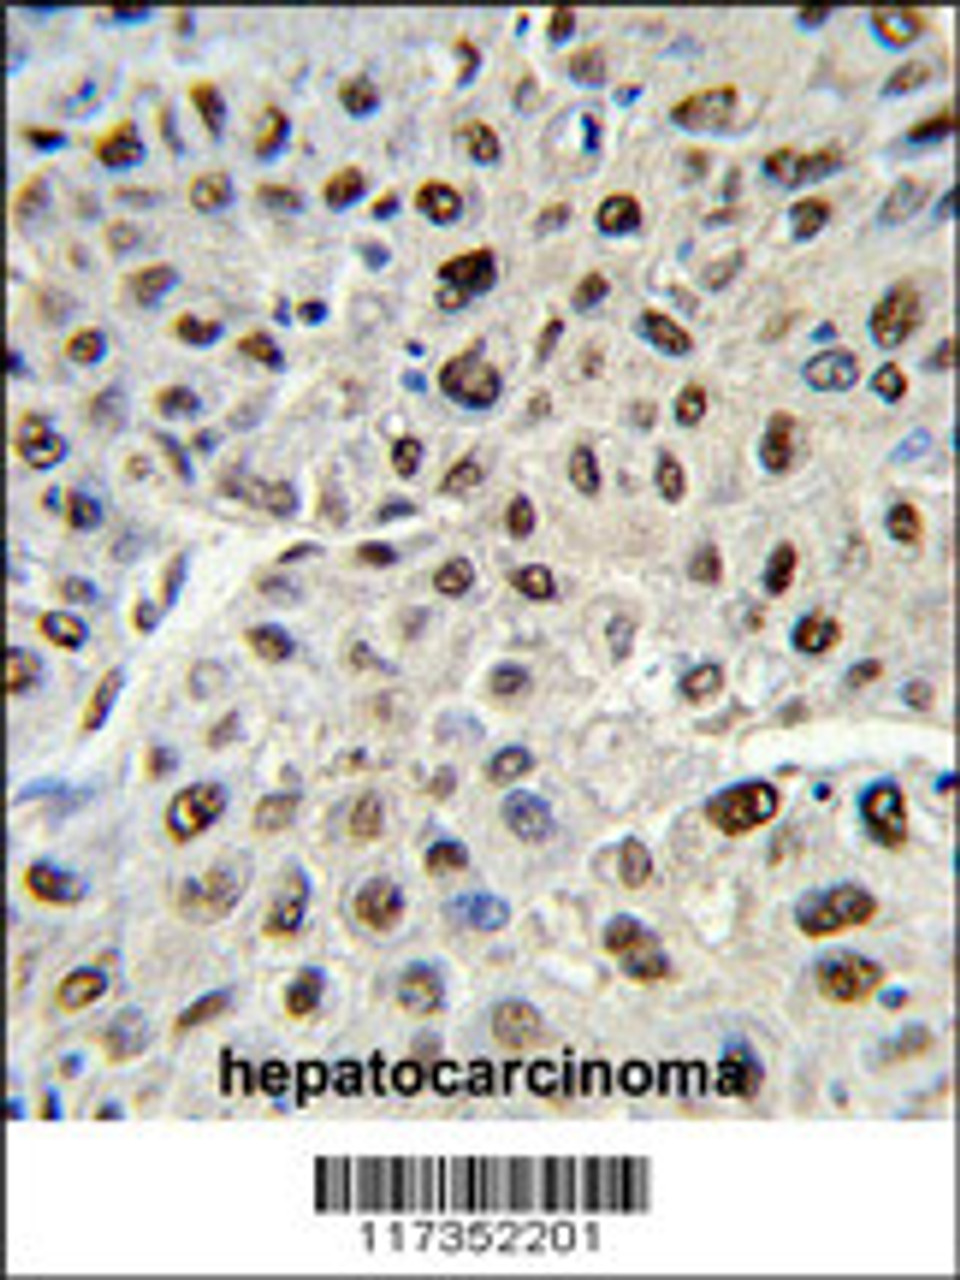 Formalin-fixed and paraffin-embedded human hepatocarcinoma reacted with SSB Antibody, which was peroxidase-conjugated to the secondary antibody, followed by DAB staining.